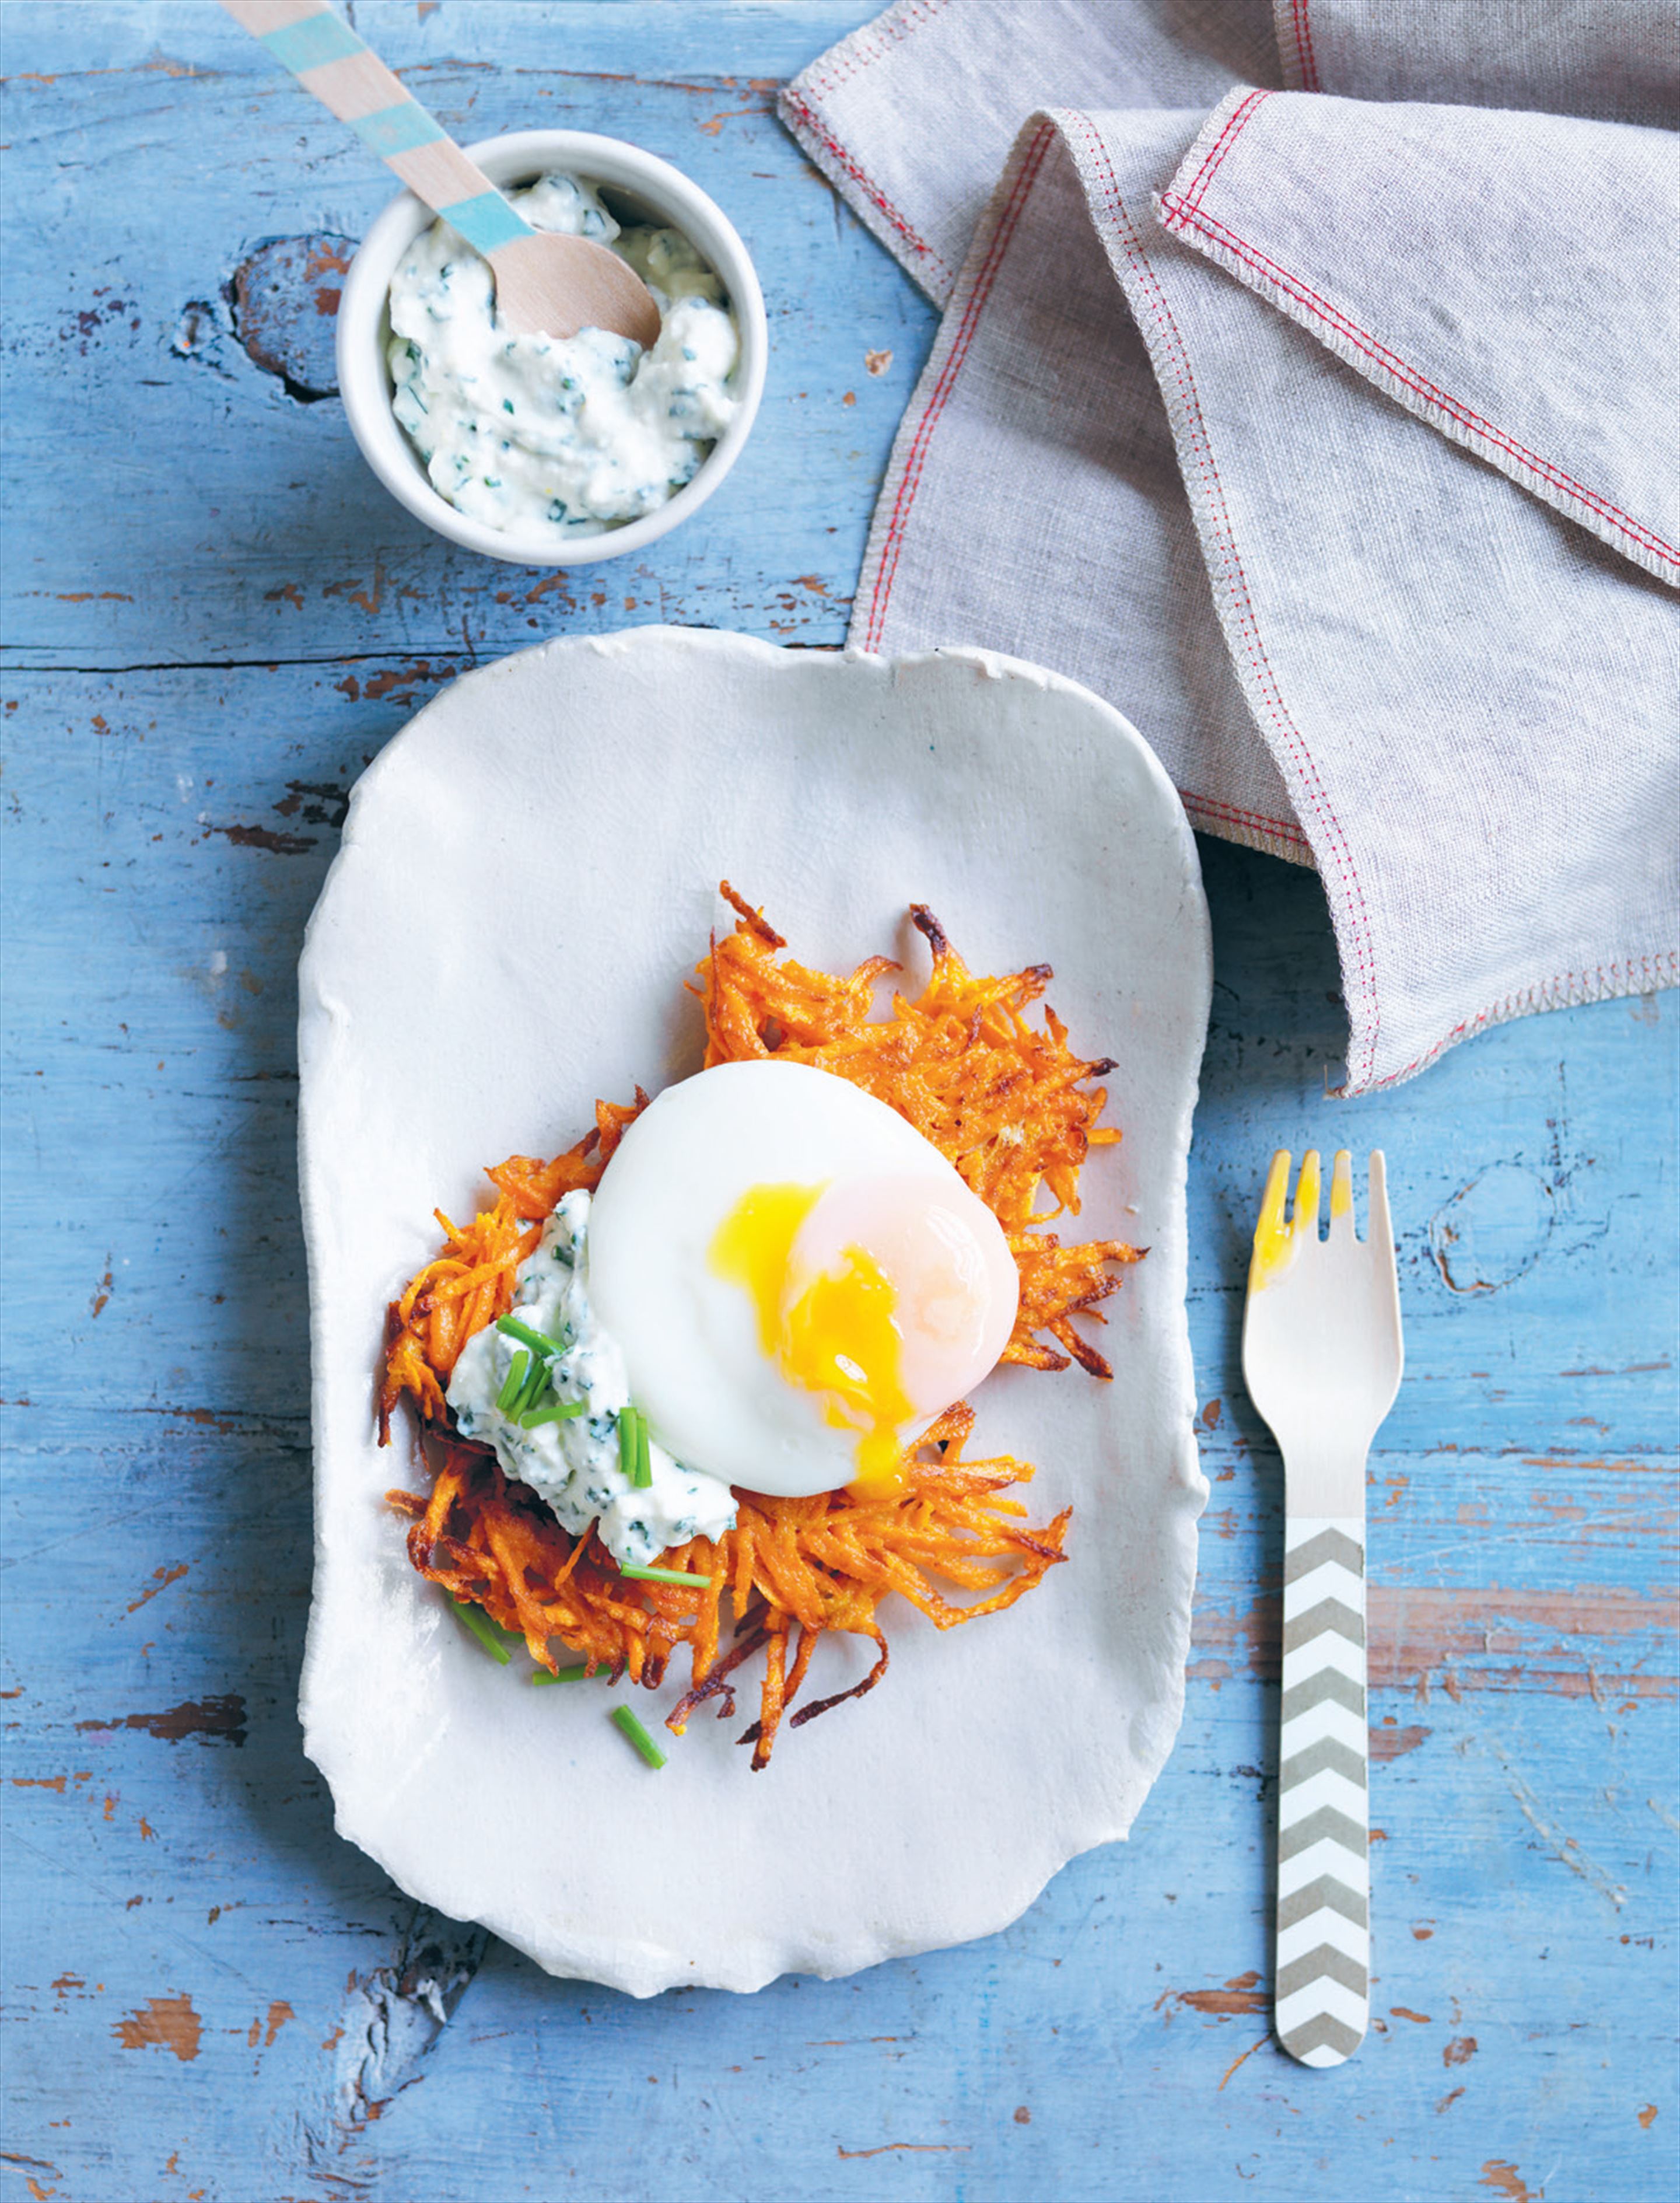 Sweet potato rösti with herbed ricotta and poached egg